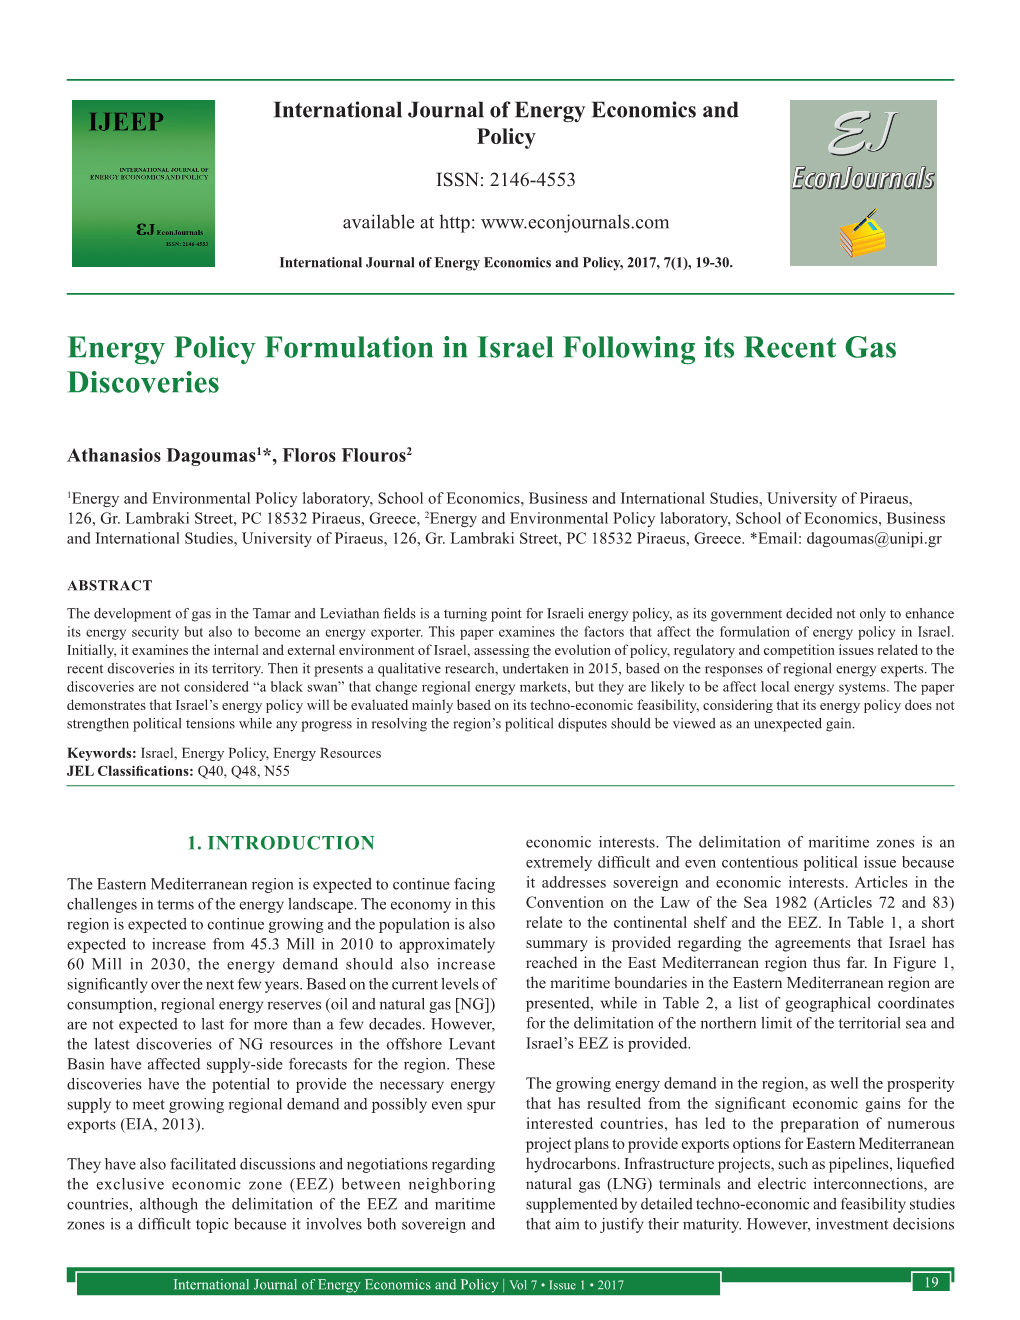 Energy Policy Formulation in Israel Following Its Recent Gas Discoveries